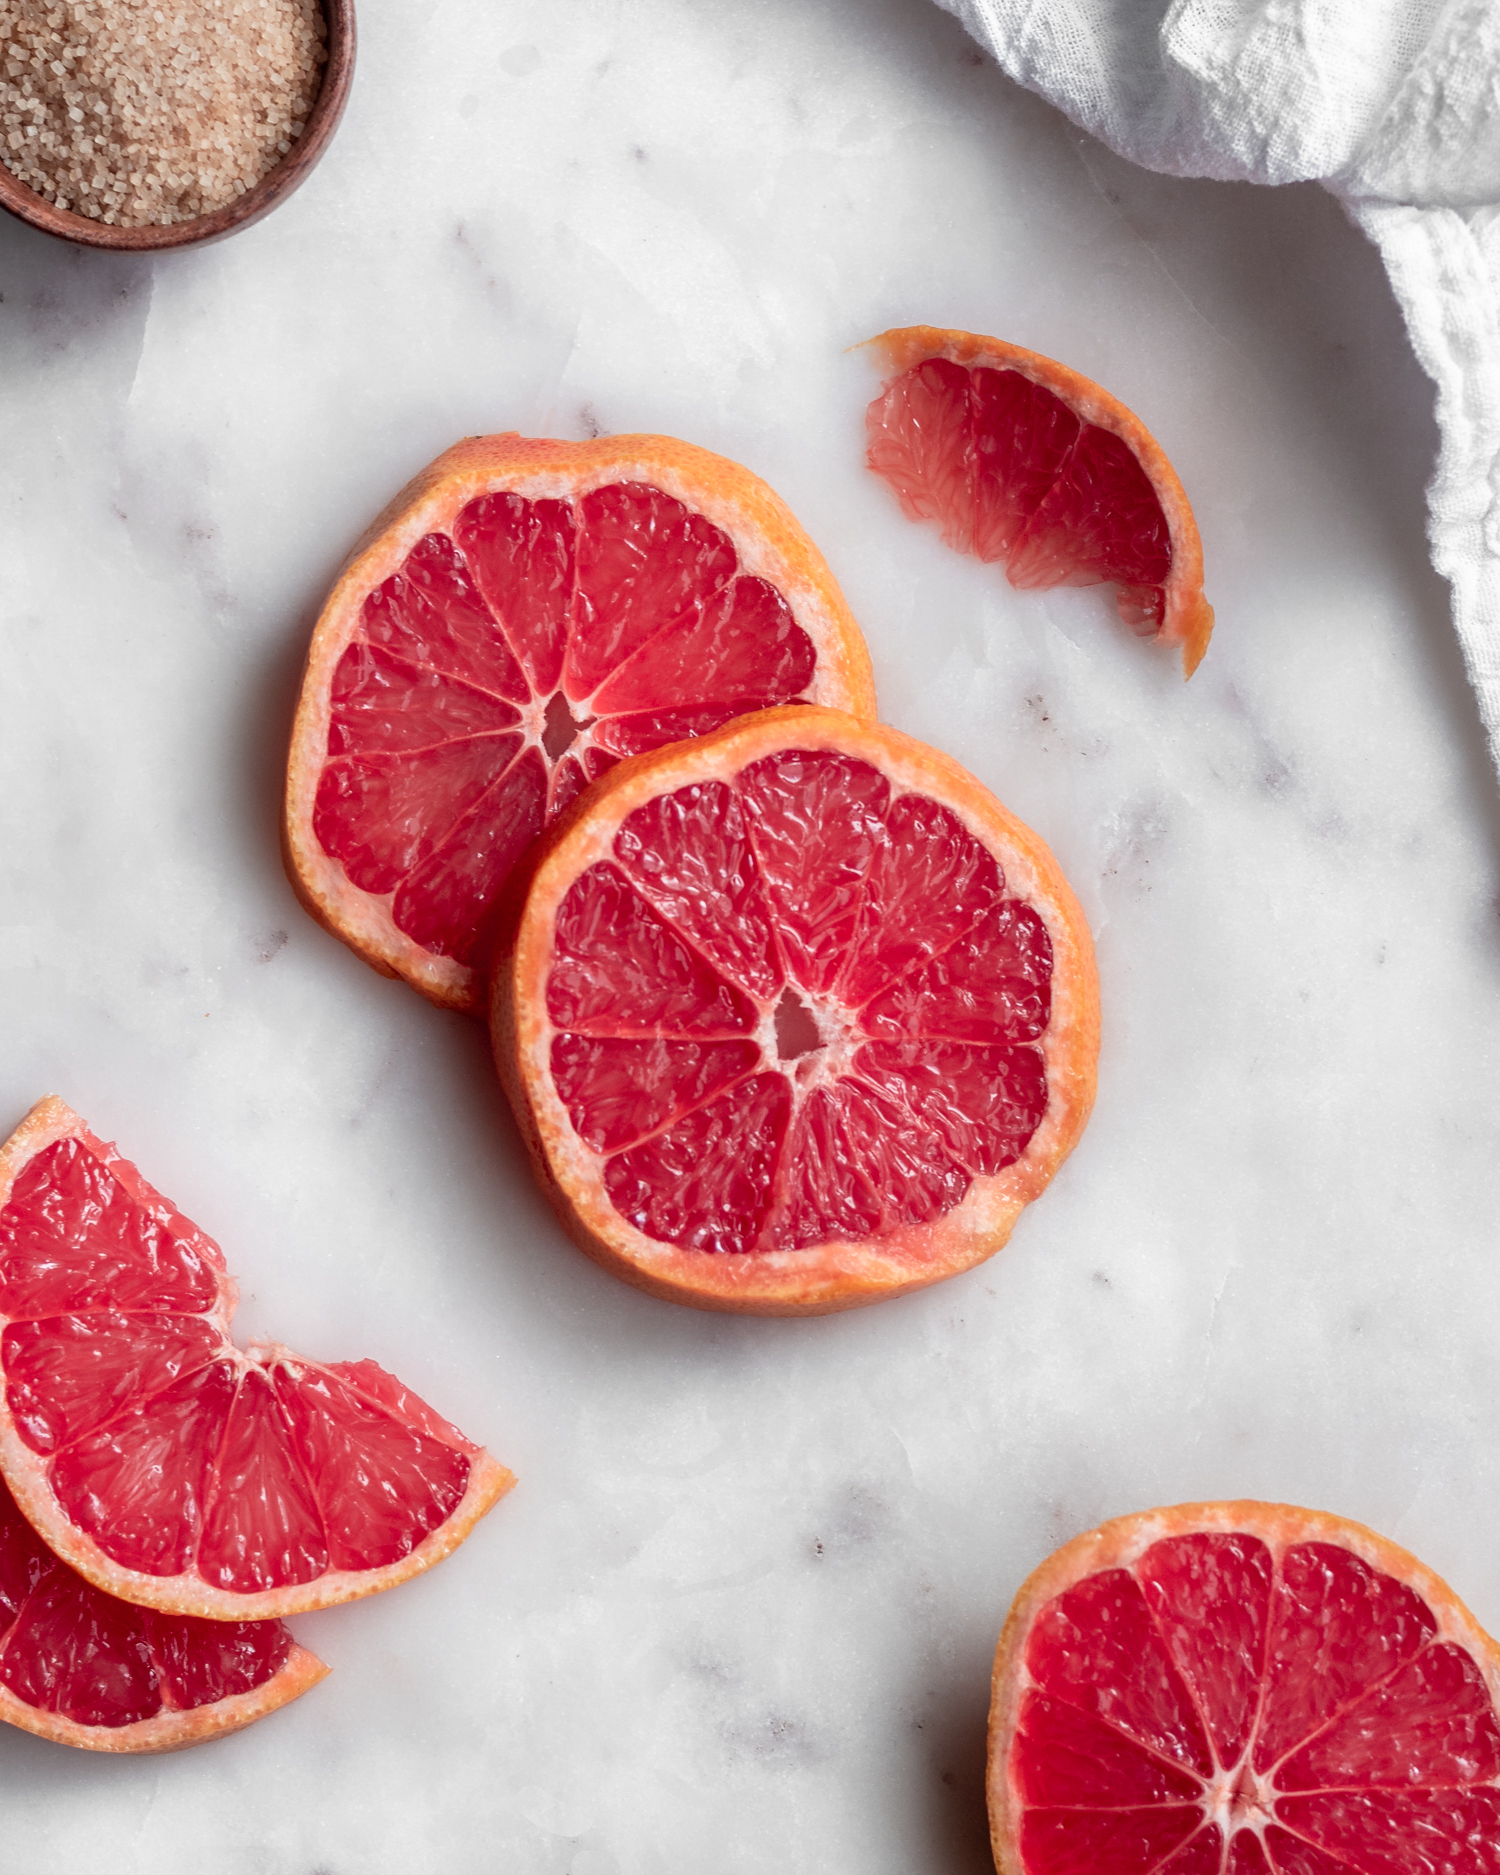 An overhead image of slices of grapefruit on a marble counter.